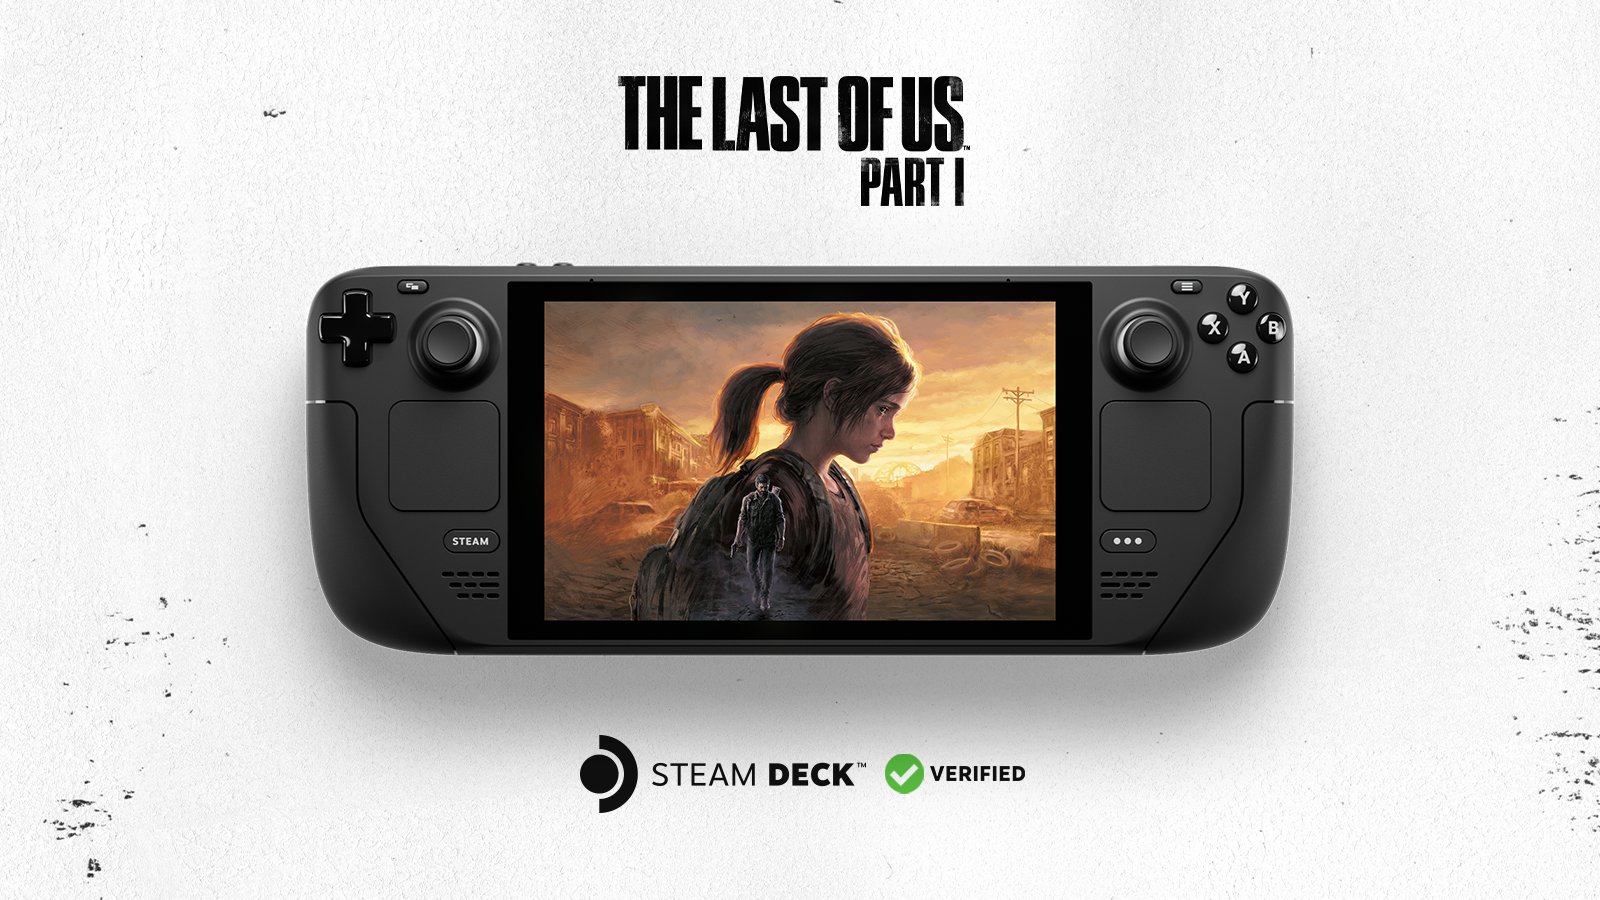 Valve downgrades The Last of Us Part 1 to unsupported on Steam Deck